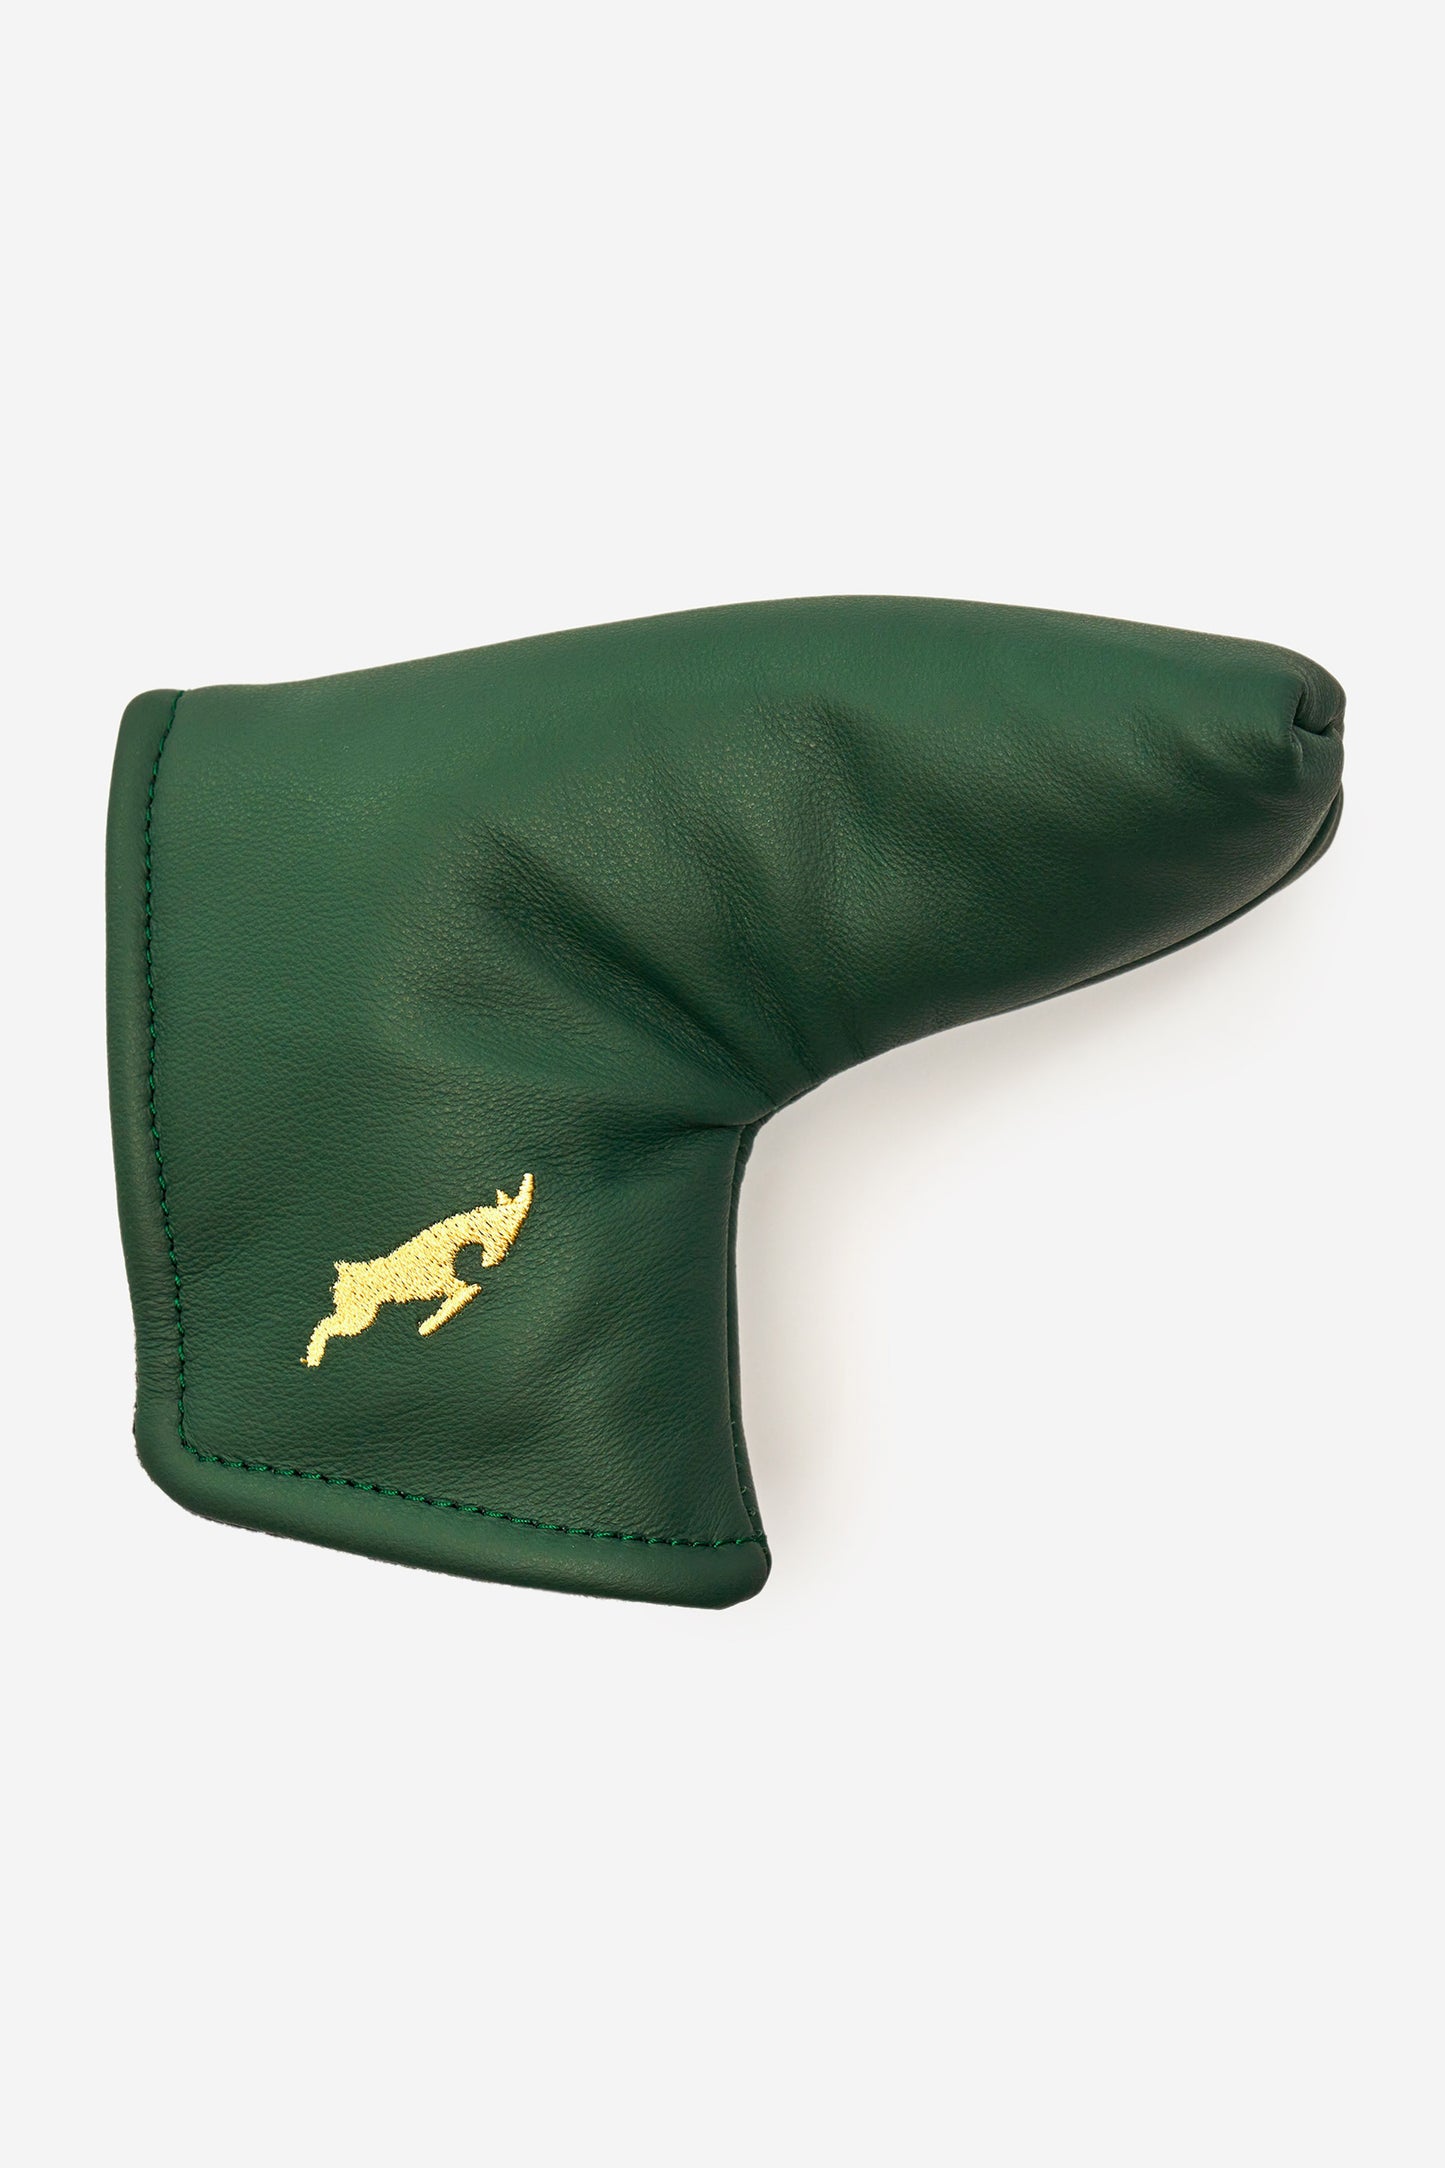 GREEN BLAD PUTTER COVER